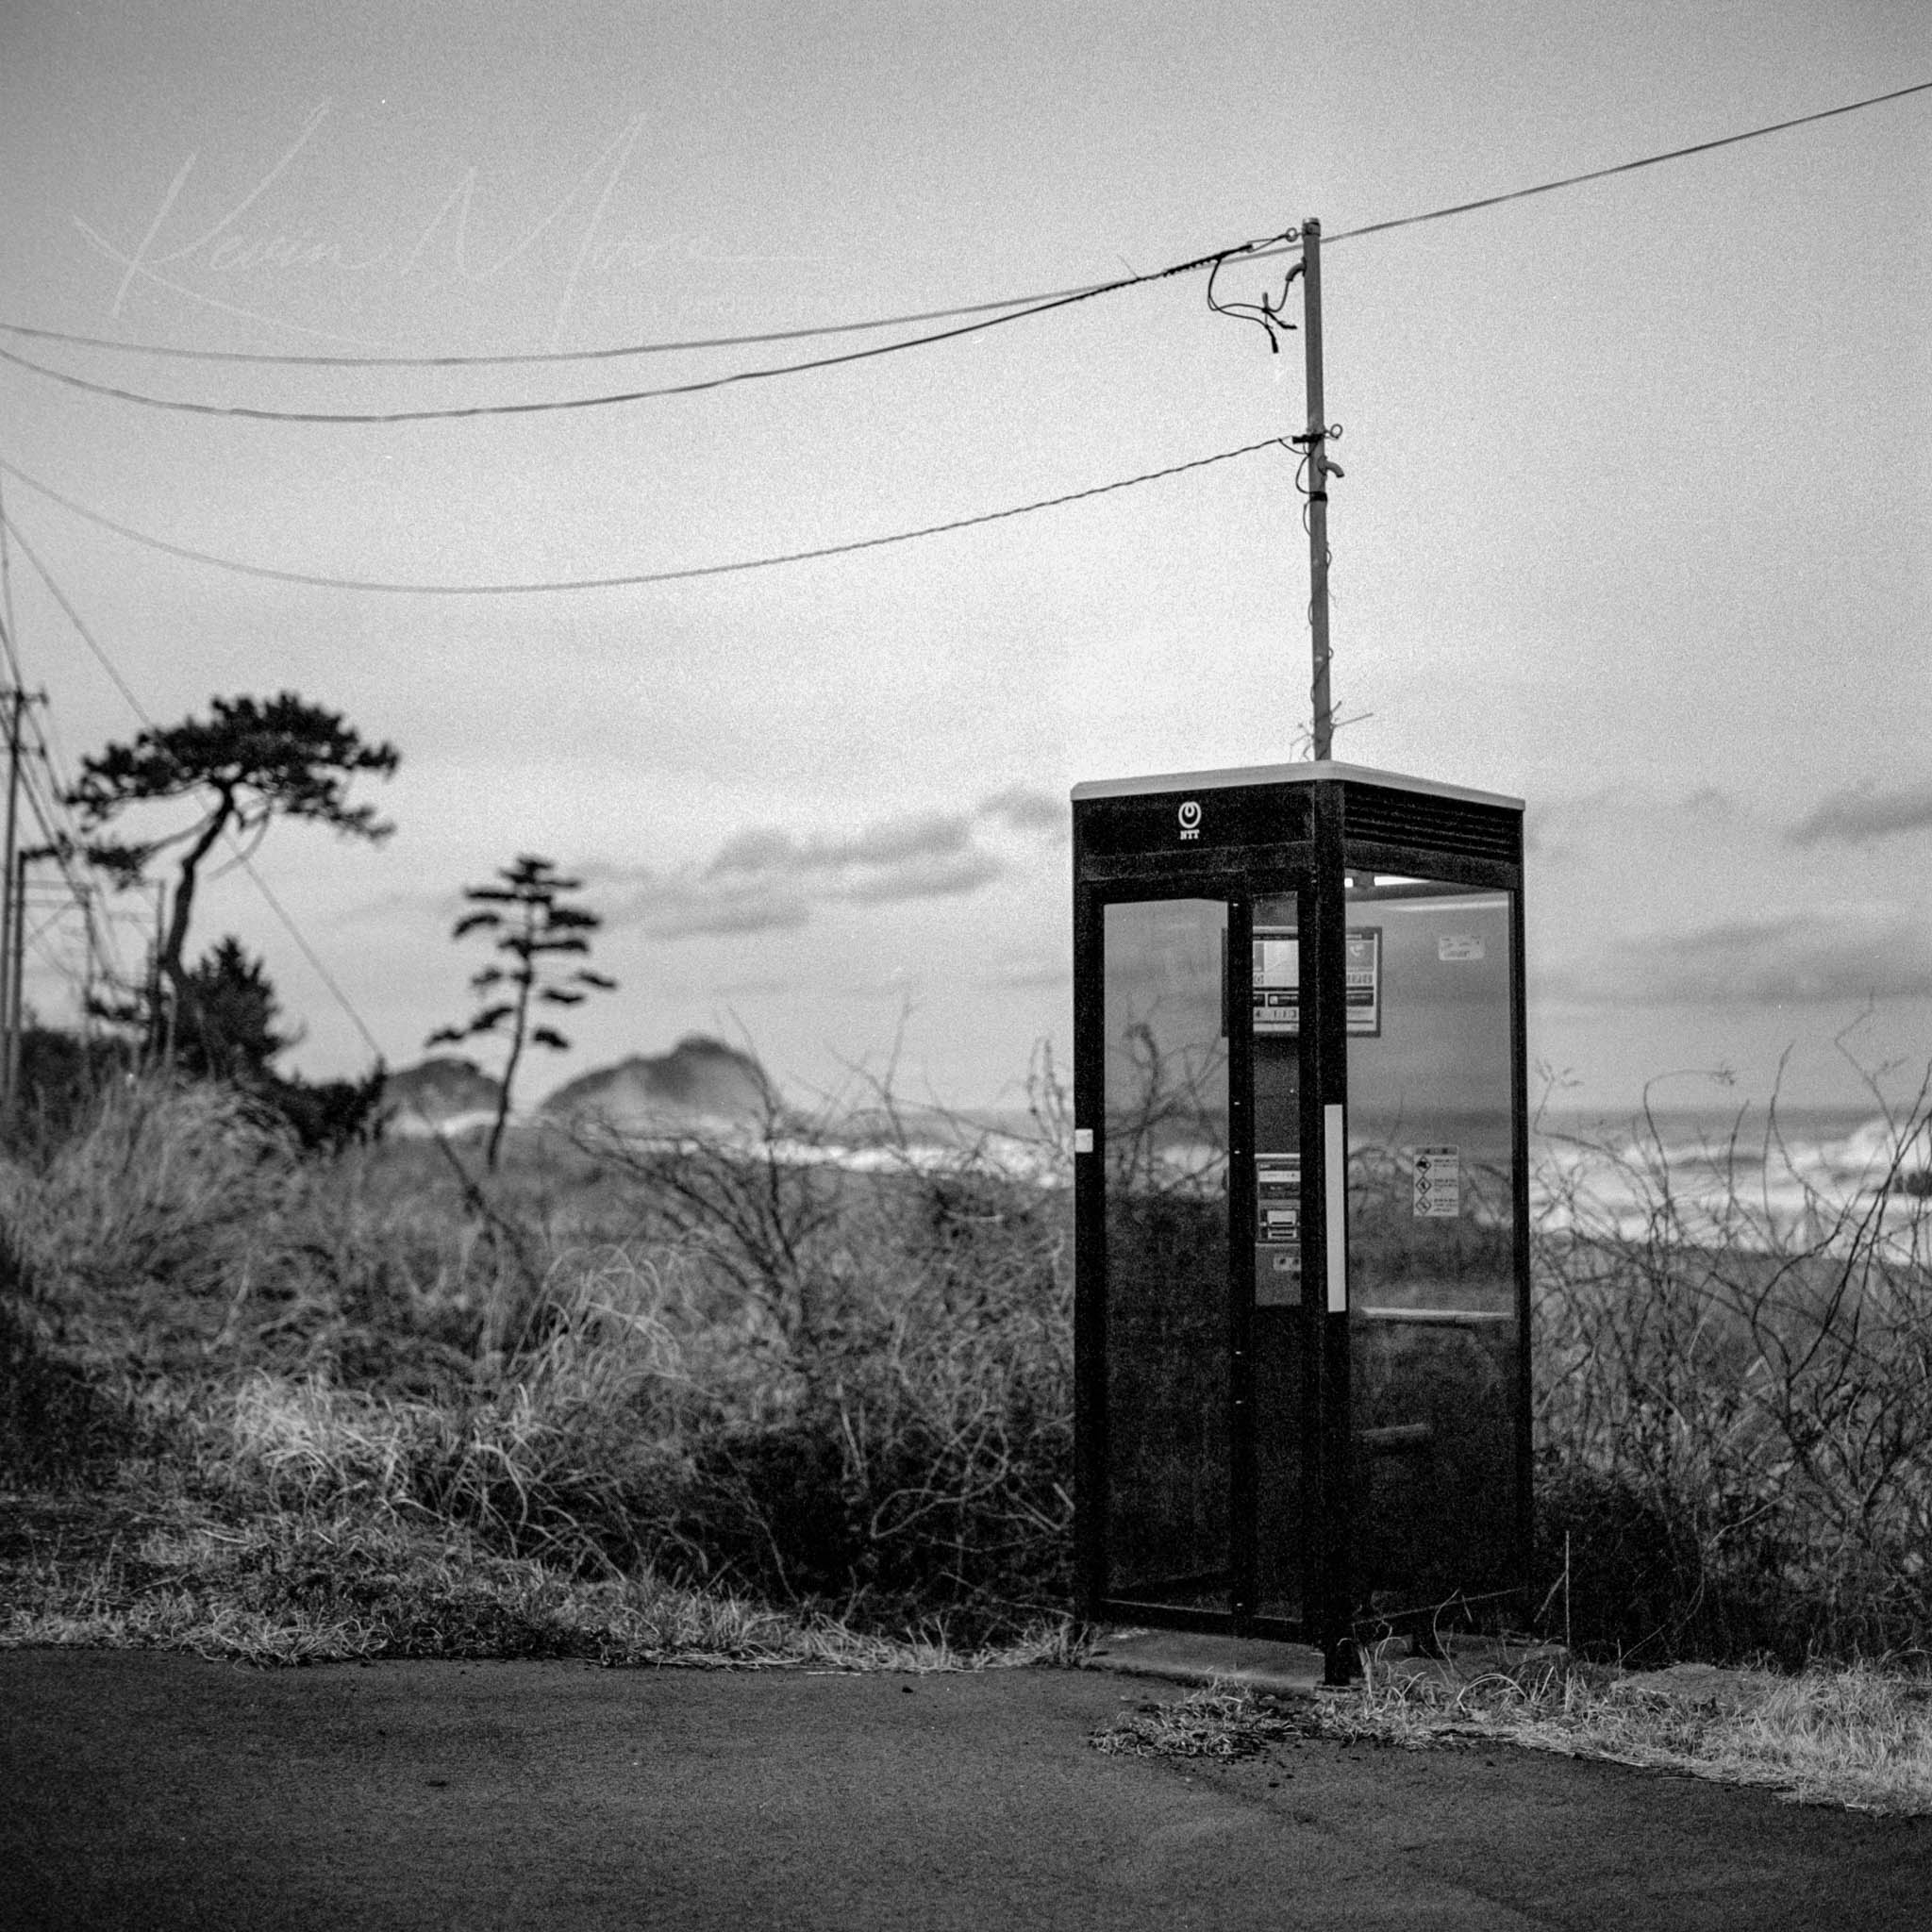 Vintage phone booth in abandoned rural landscape, black and white photography